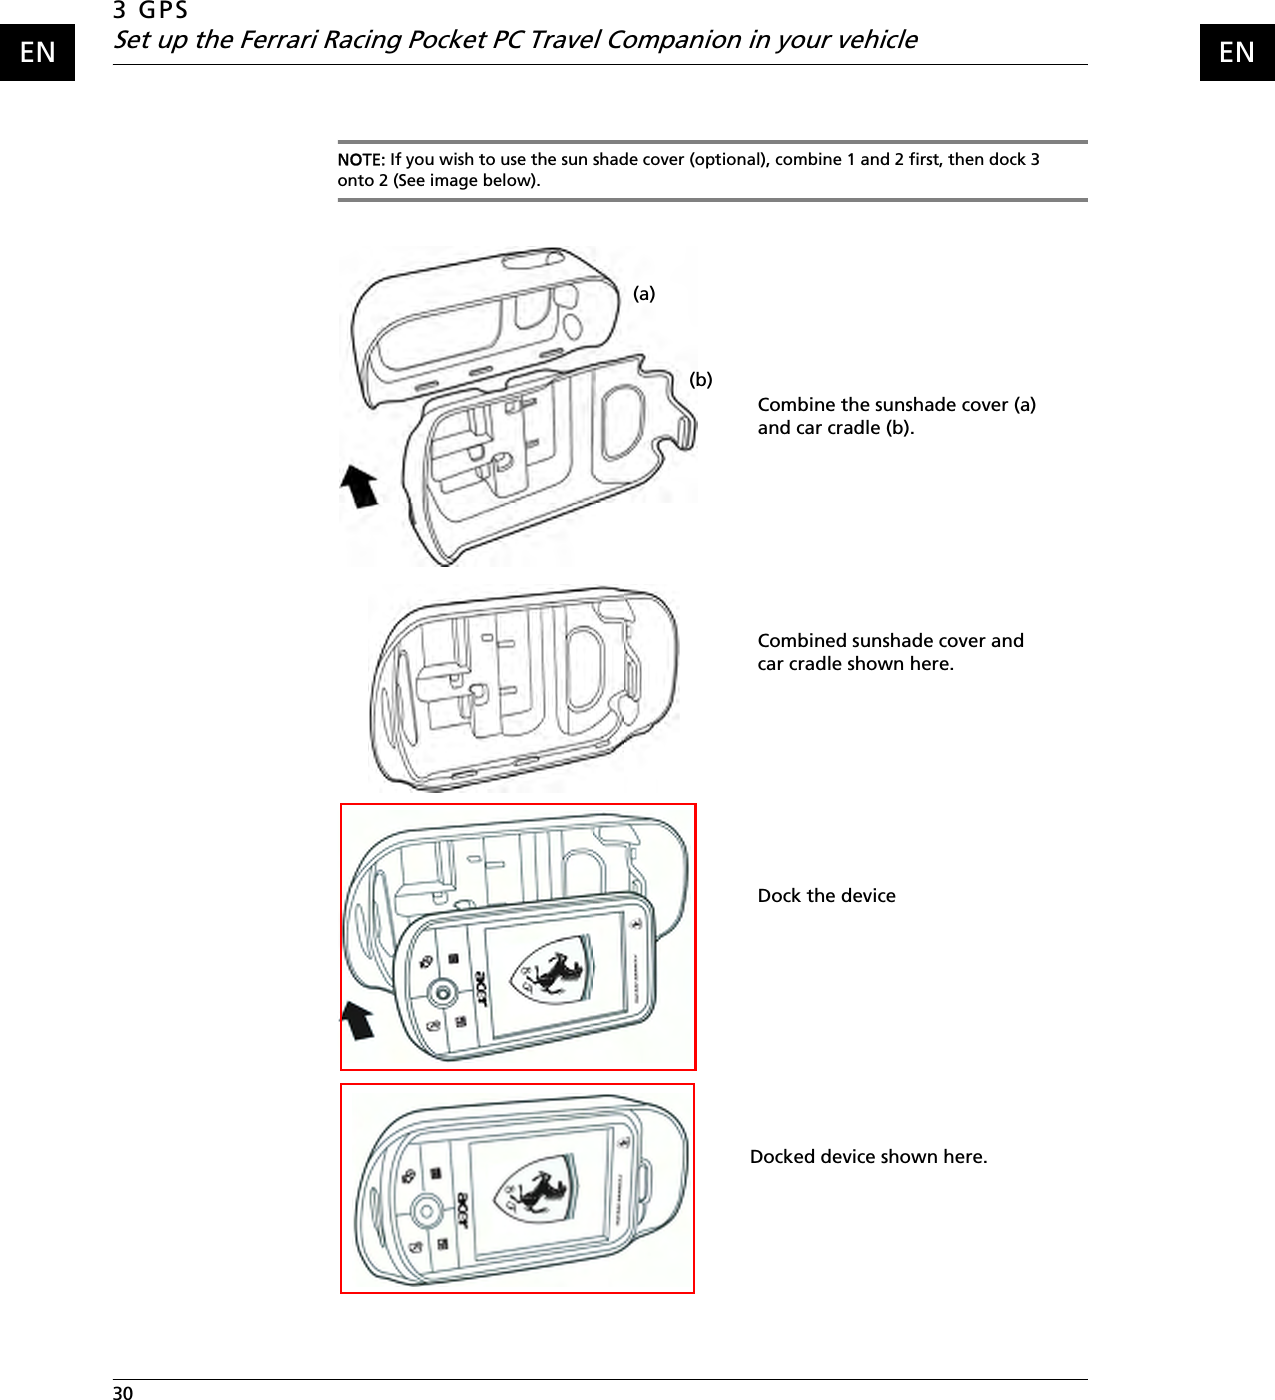 3 GPSSet up the Ferrari Racing Pocket PC Travel Companion in your vehicle30    ENENNOTE: If you wish to use the sun shade cover (optional), combine 1 and 2 first, then dock 3 onto 2 (See image below).(b)(a)Combine the sunshade cover (a) and car cradle (b).Combined sunshade cover and car cradle shown here.Dock the deviceDocked device shown here.